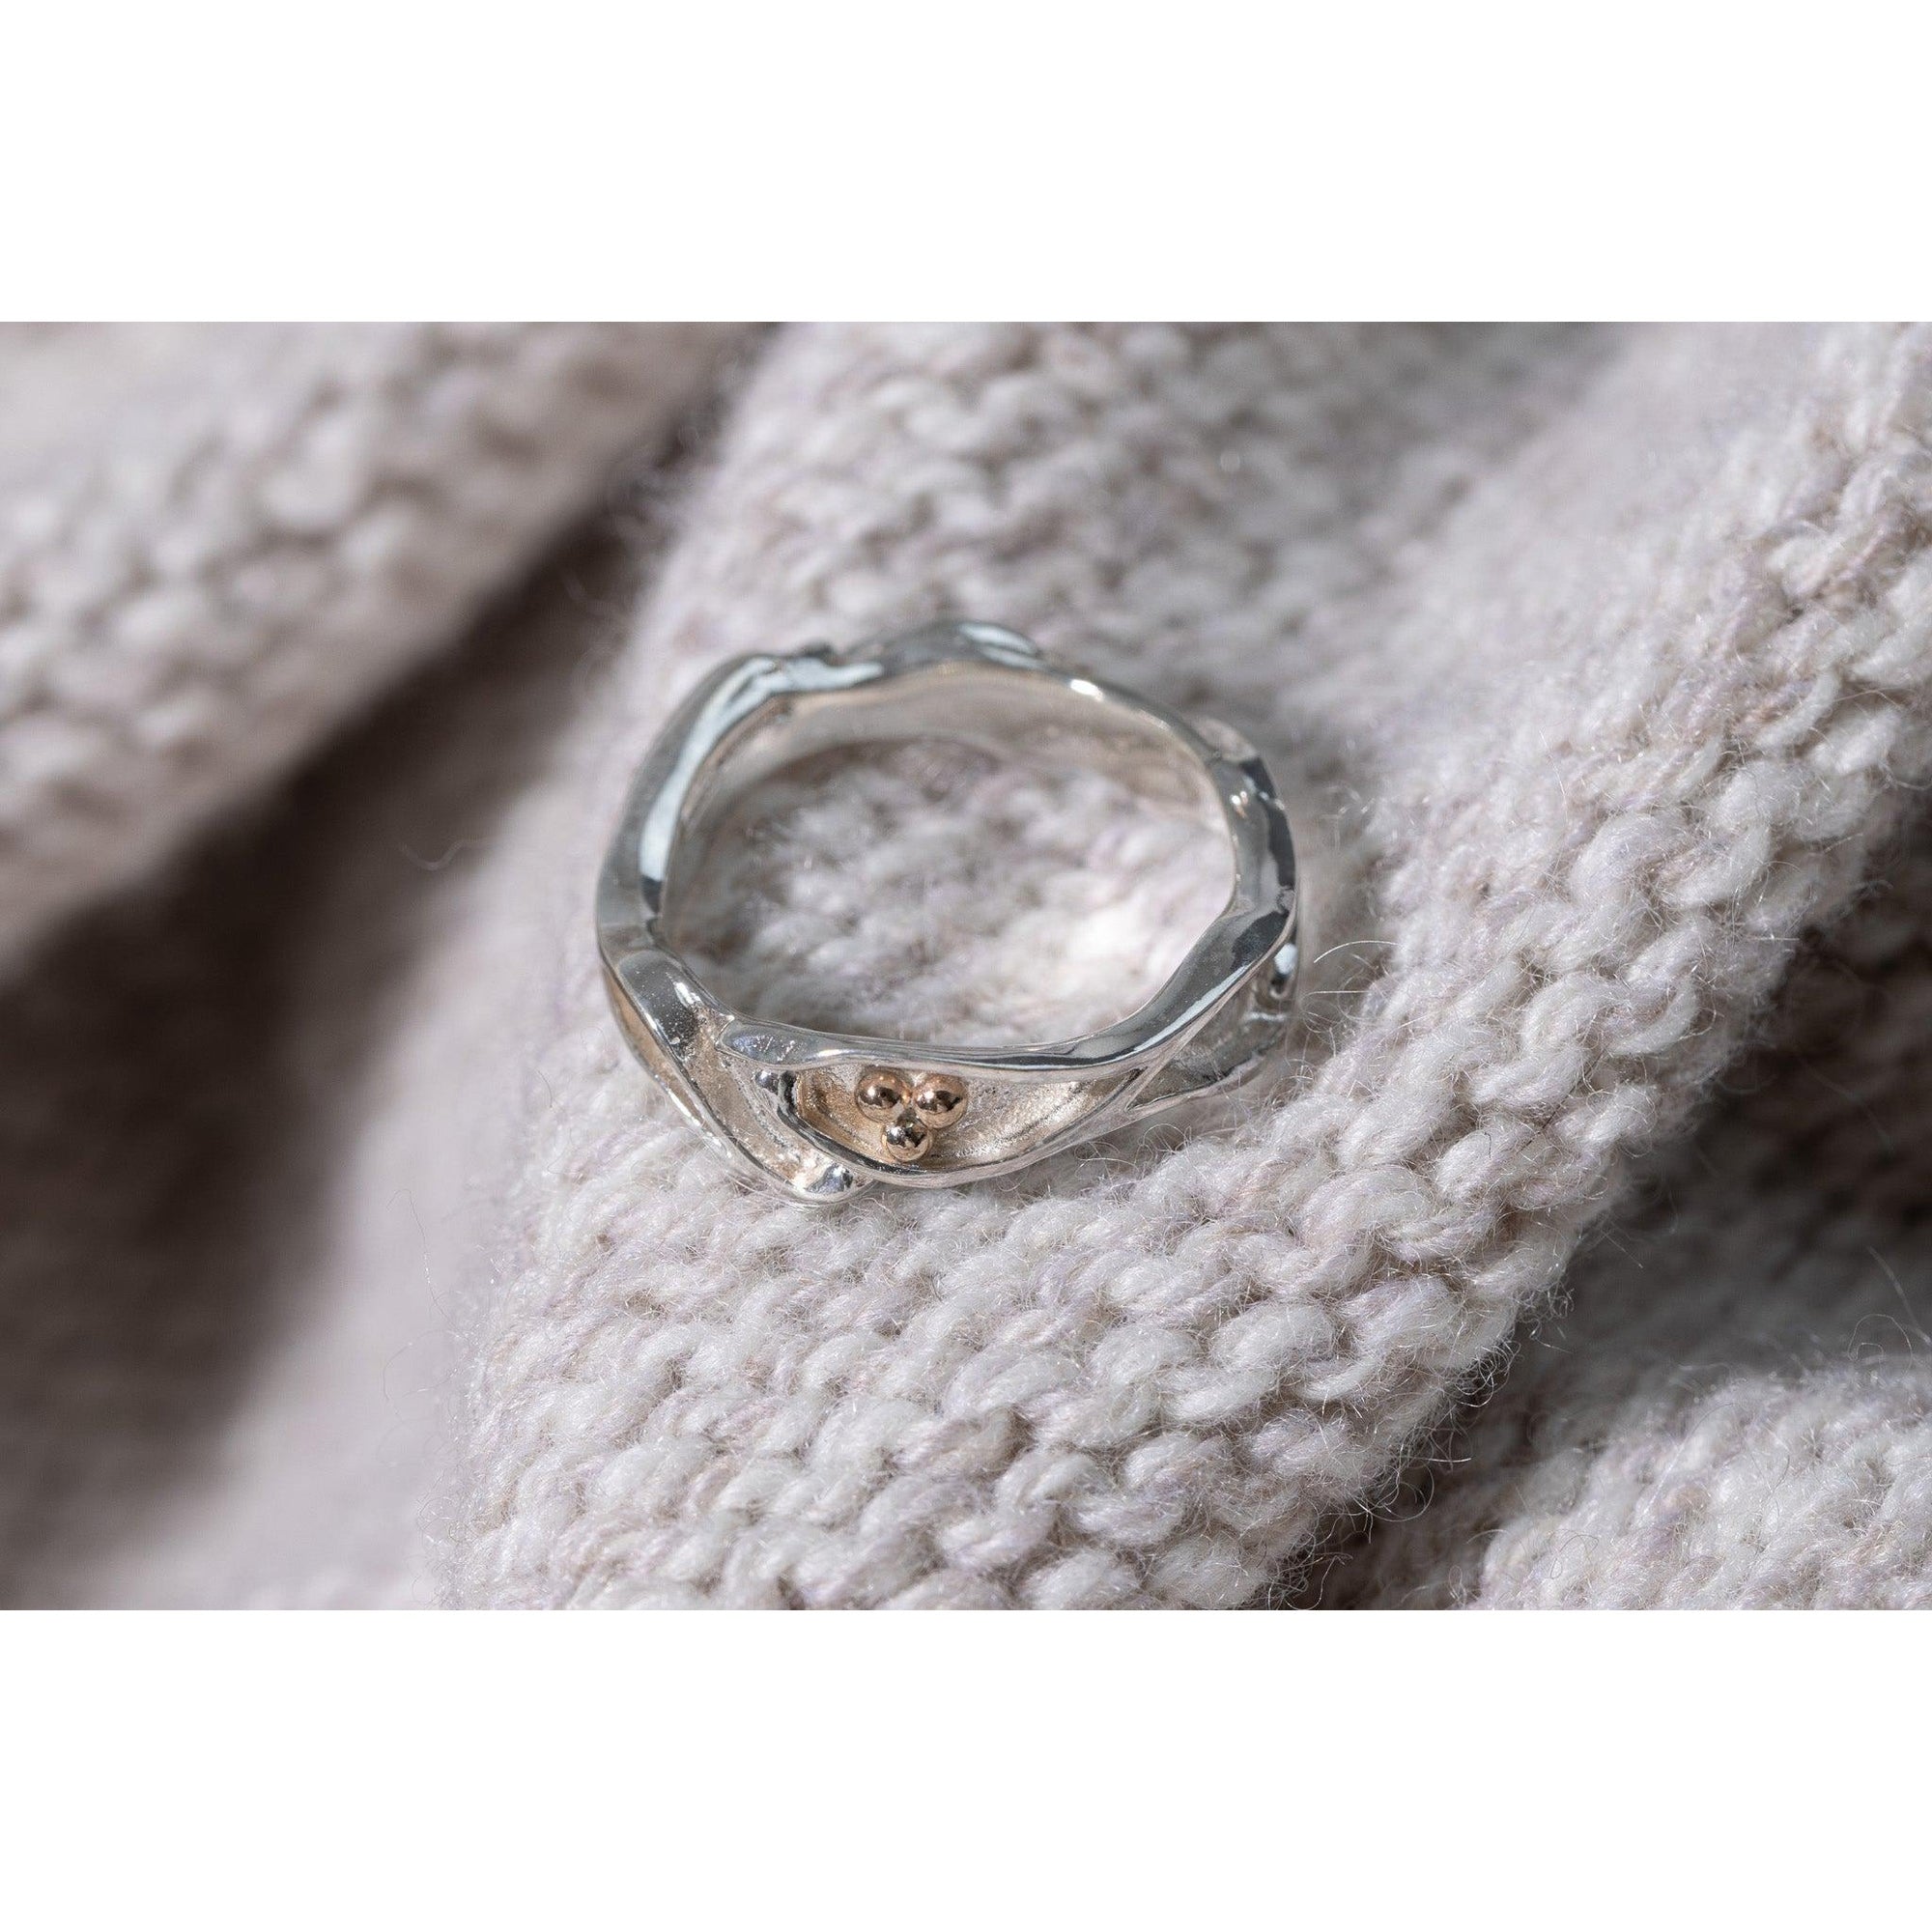 'LG57 - Silver Ring with 9ct Gold Beads' by Les Grimshaw, available at Padstow Gallery, Cornwall